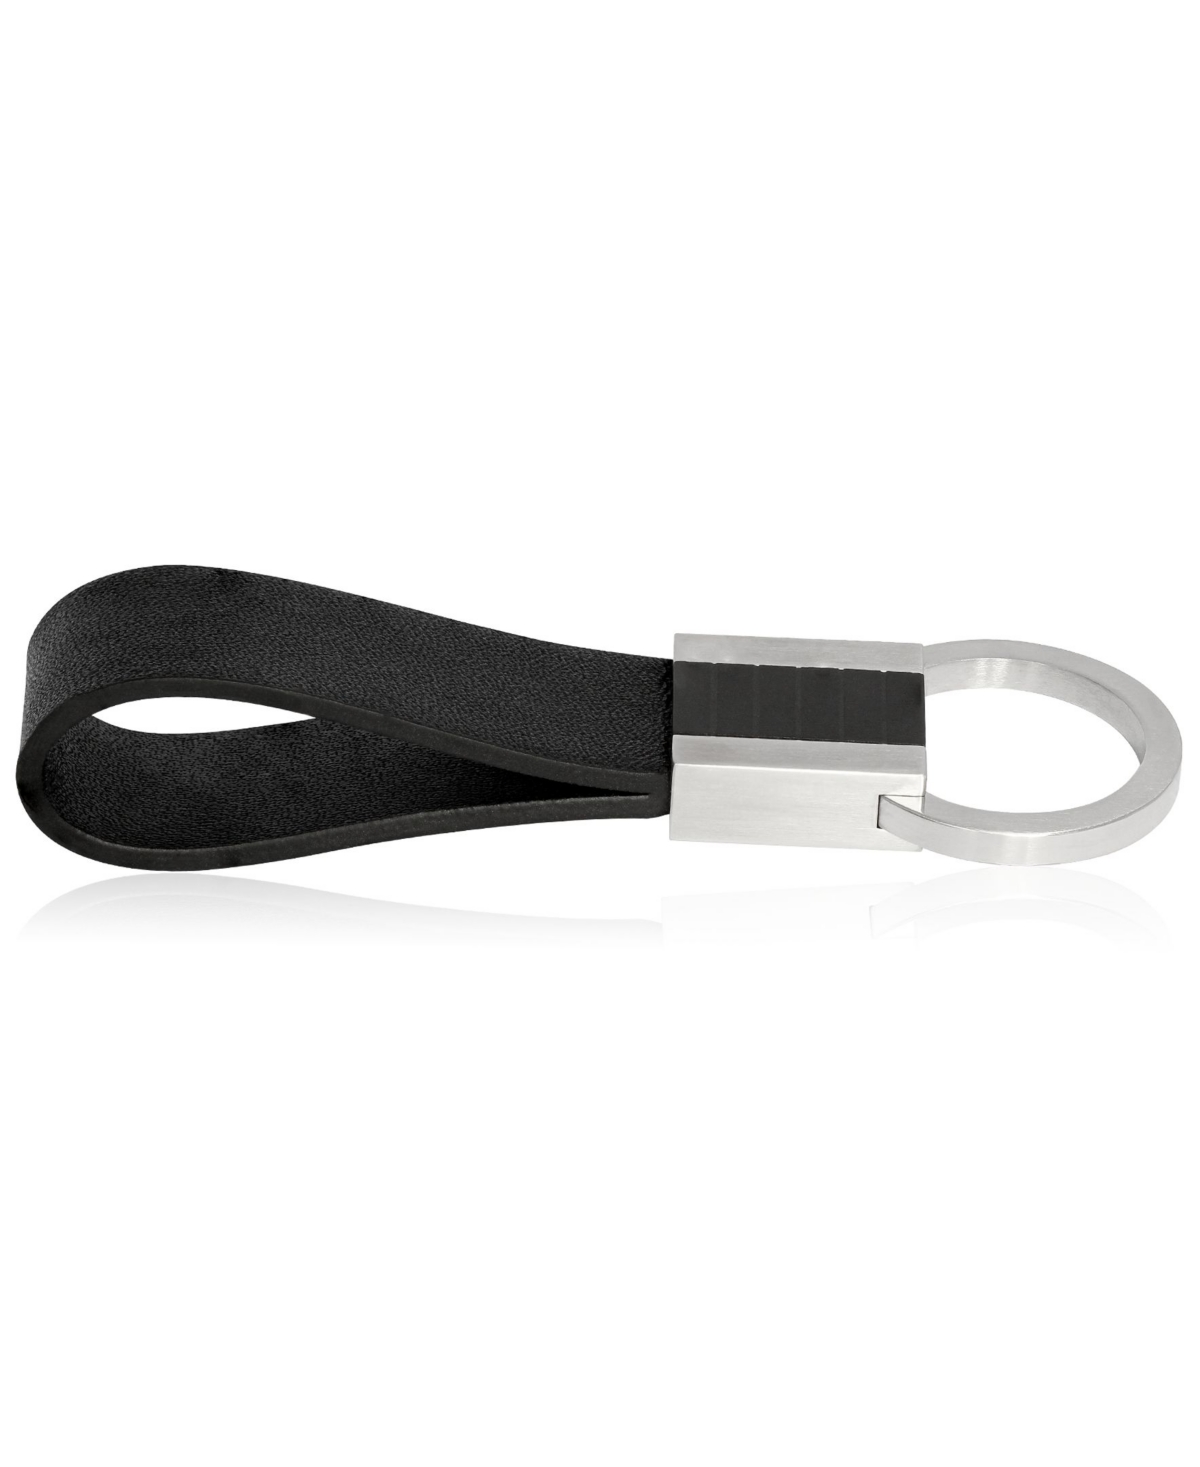 Sutton Stainless Steel Leather Key Ring - Black